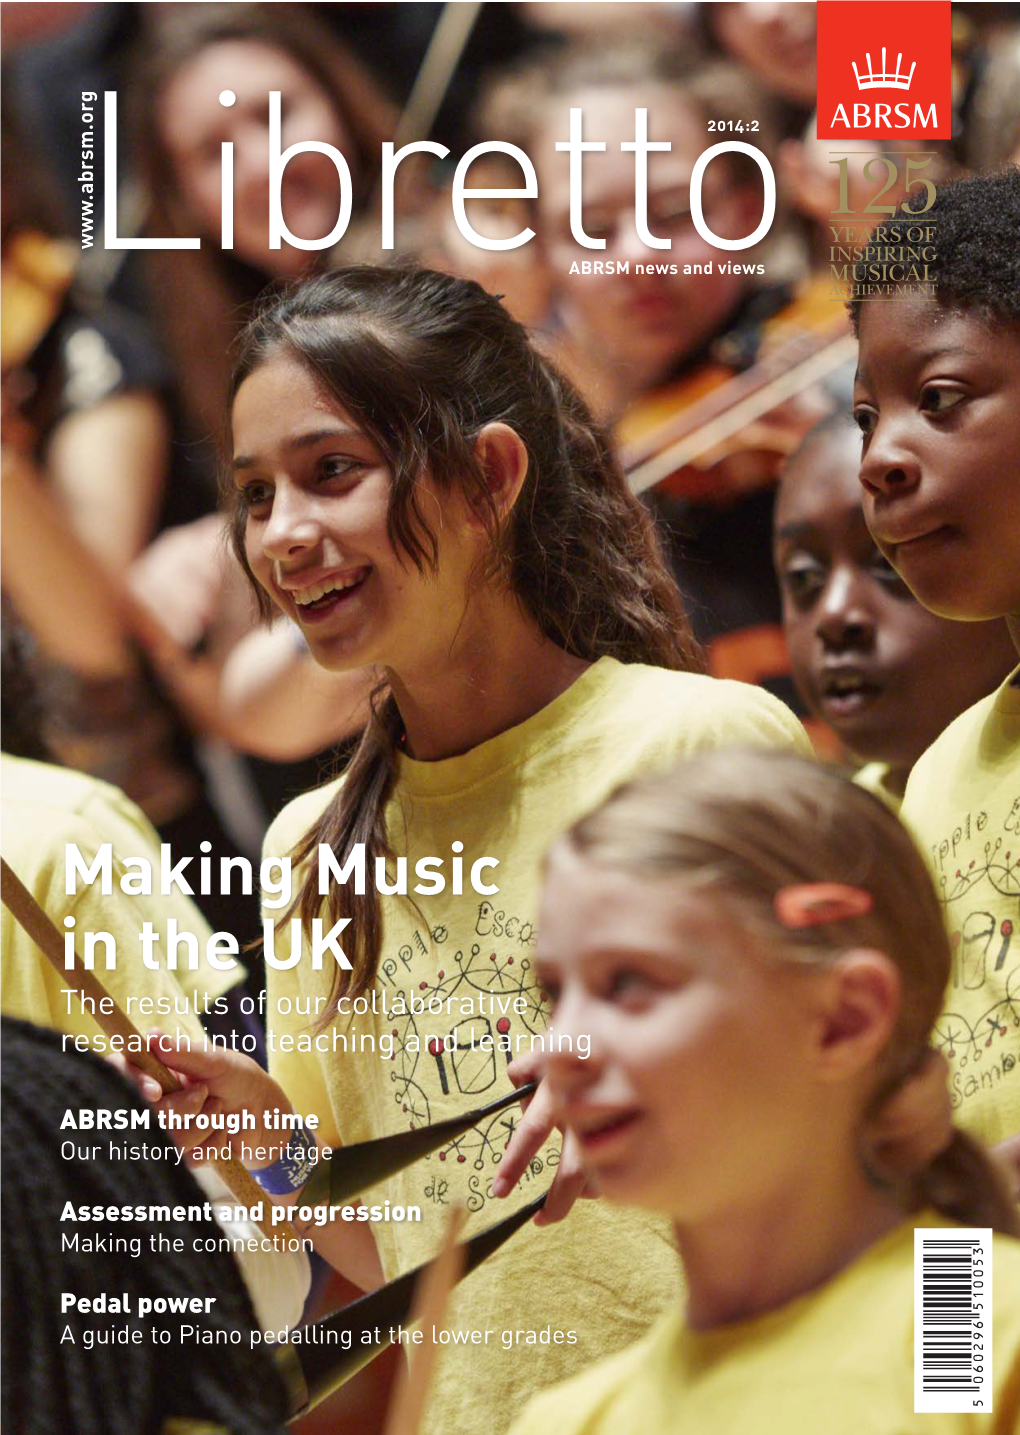 Making Music in the UK the Results of Our Collaborative Research Into Teaching and Learning